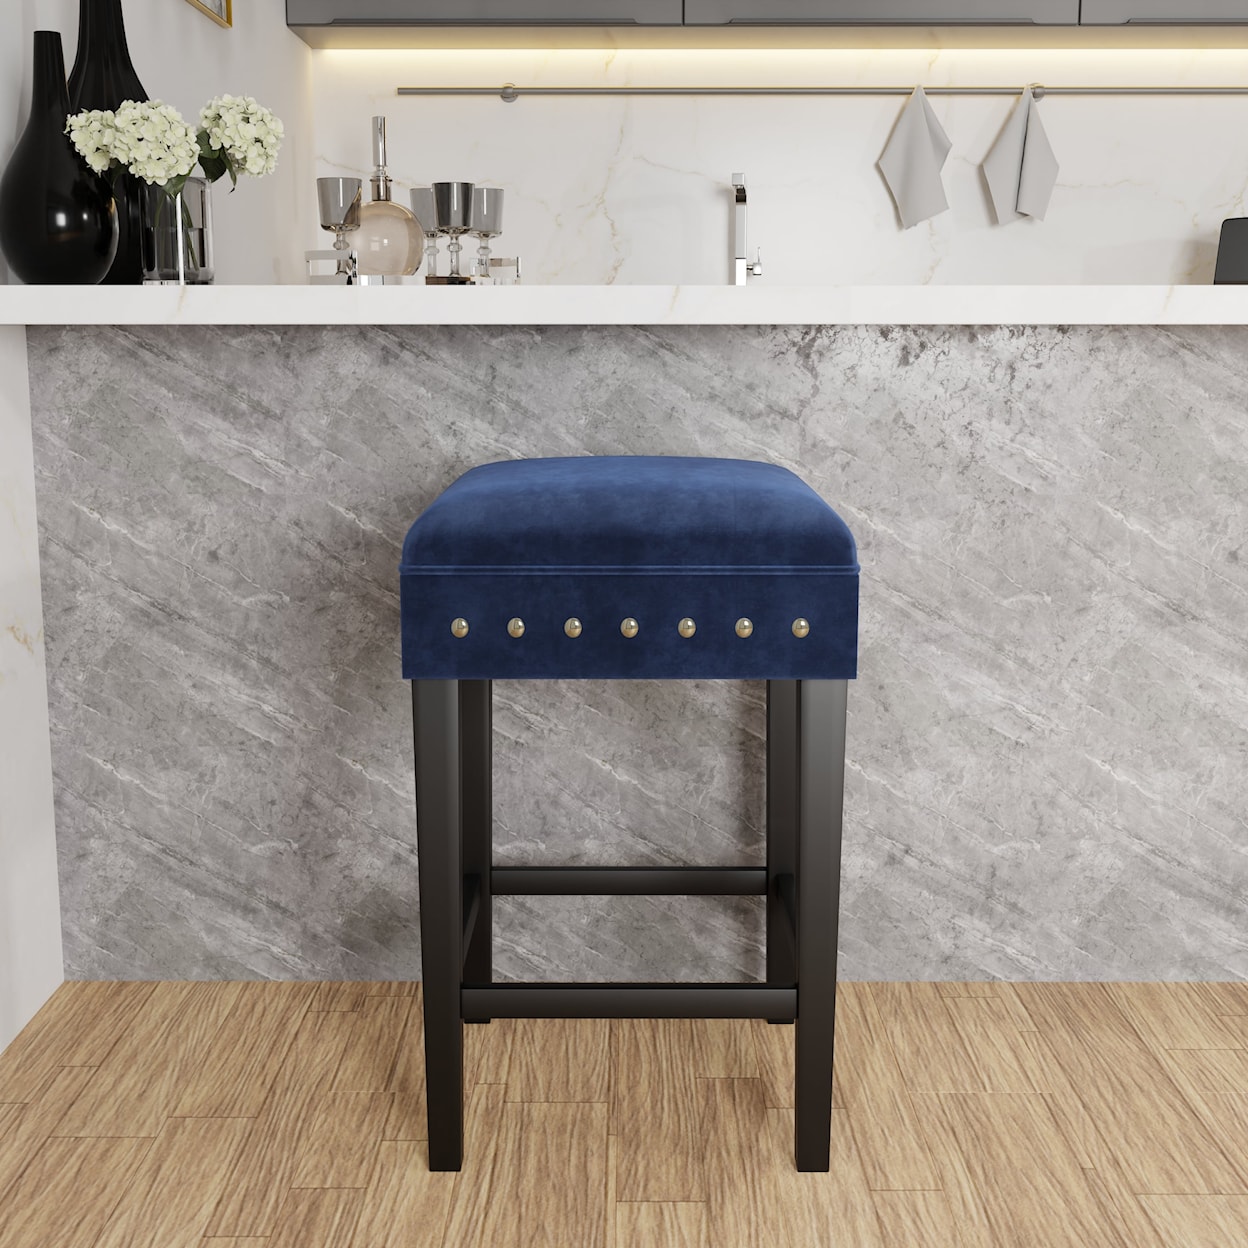 Hillsdale Cassidy Counter and Bar Stools